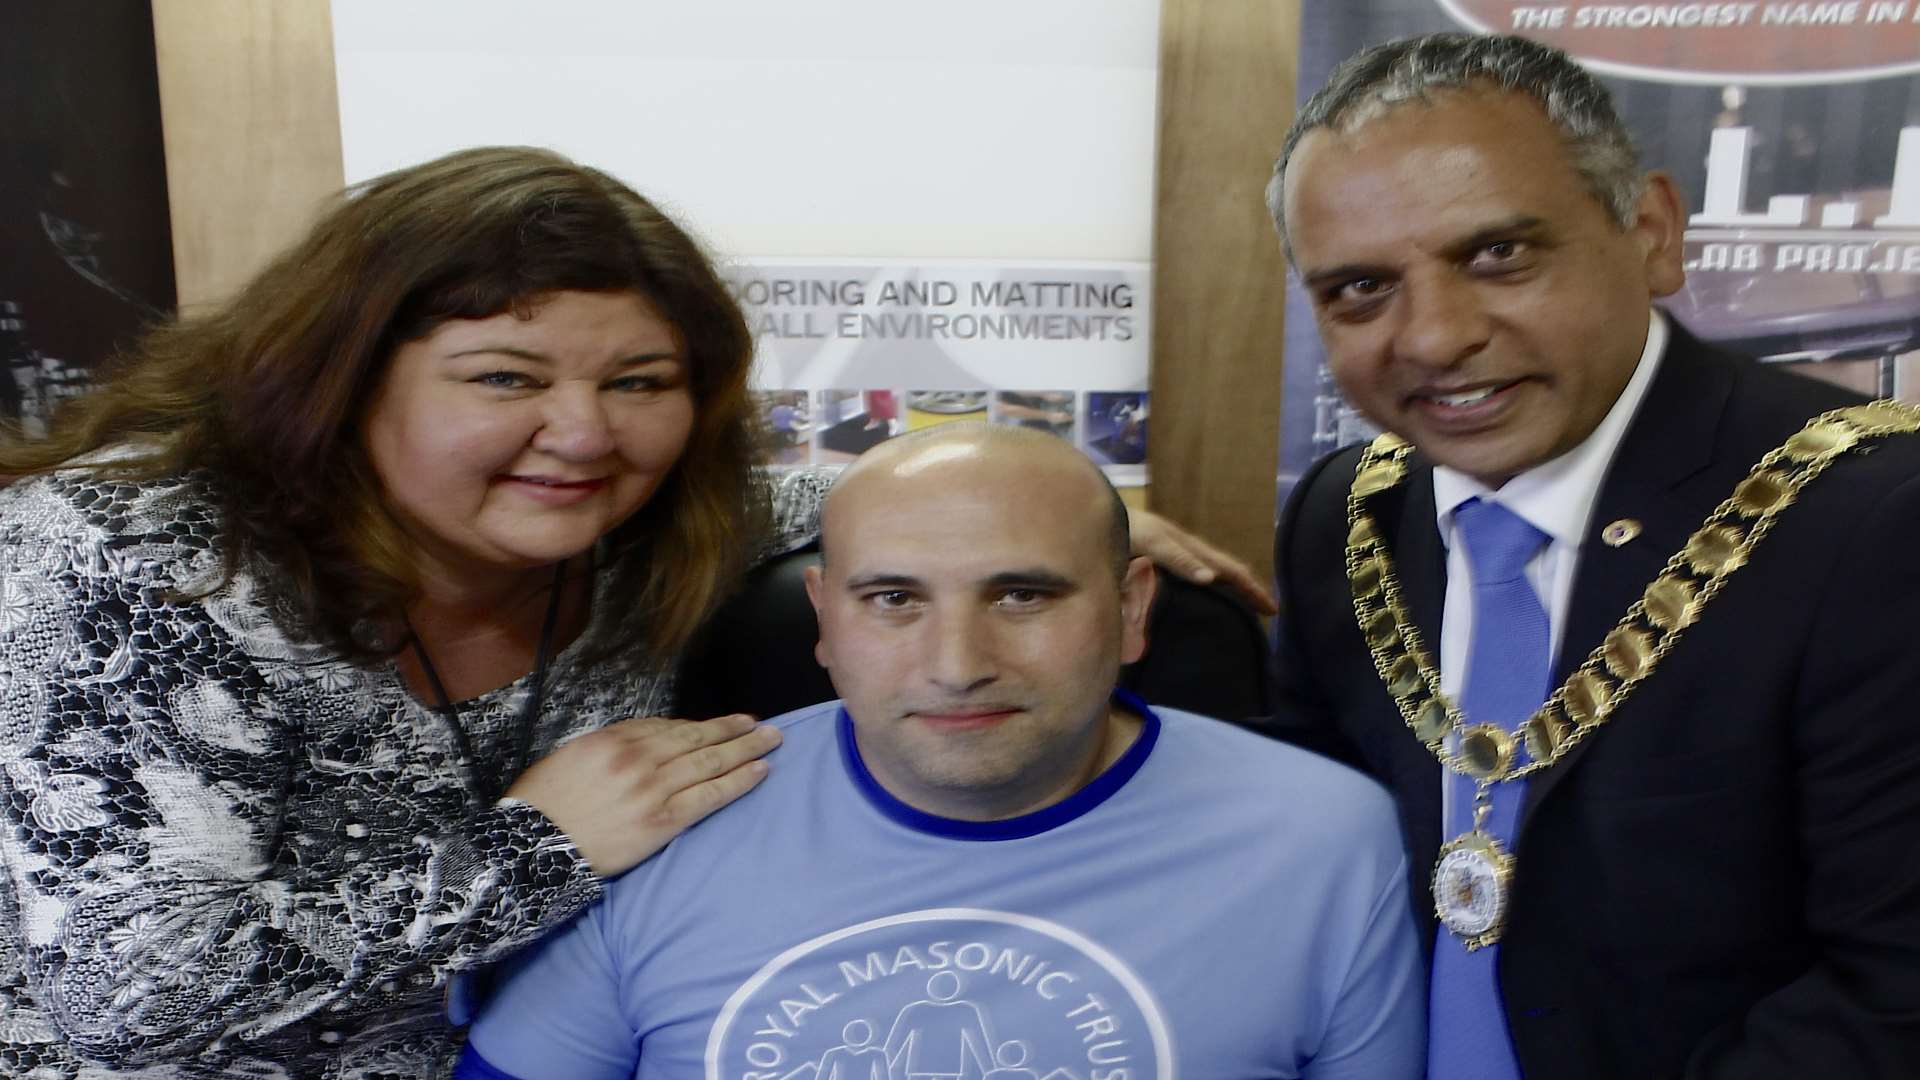 Ex-Eastenders star Cheryl Fergison and town mayor Avtar Sandhu came down to show their support